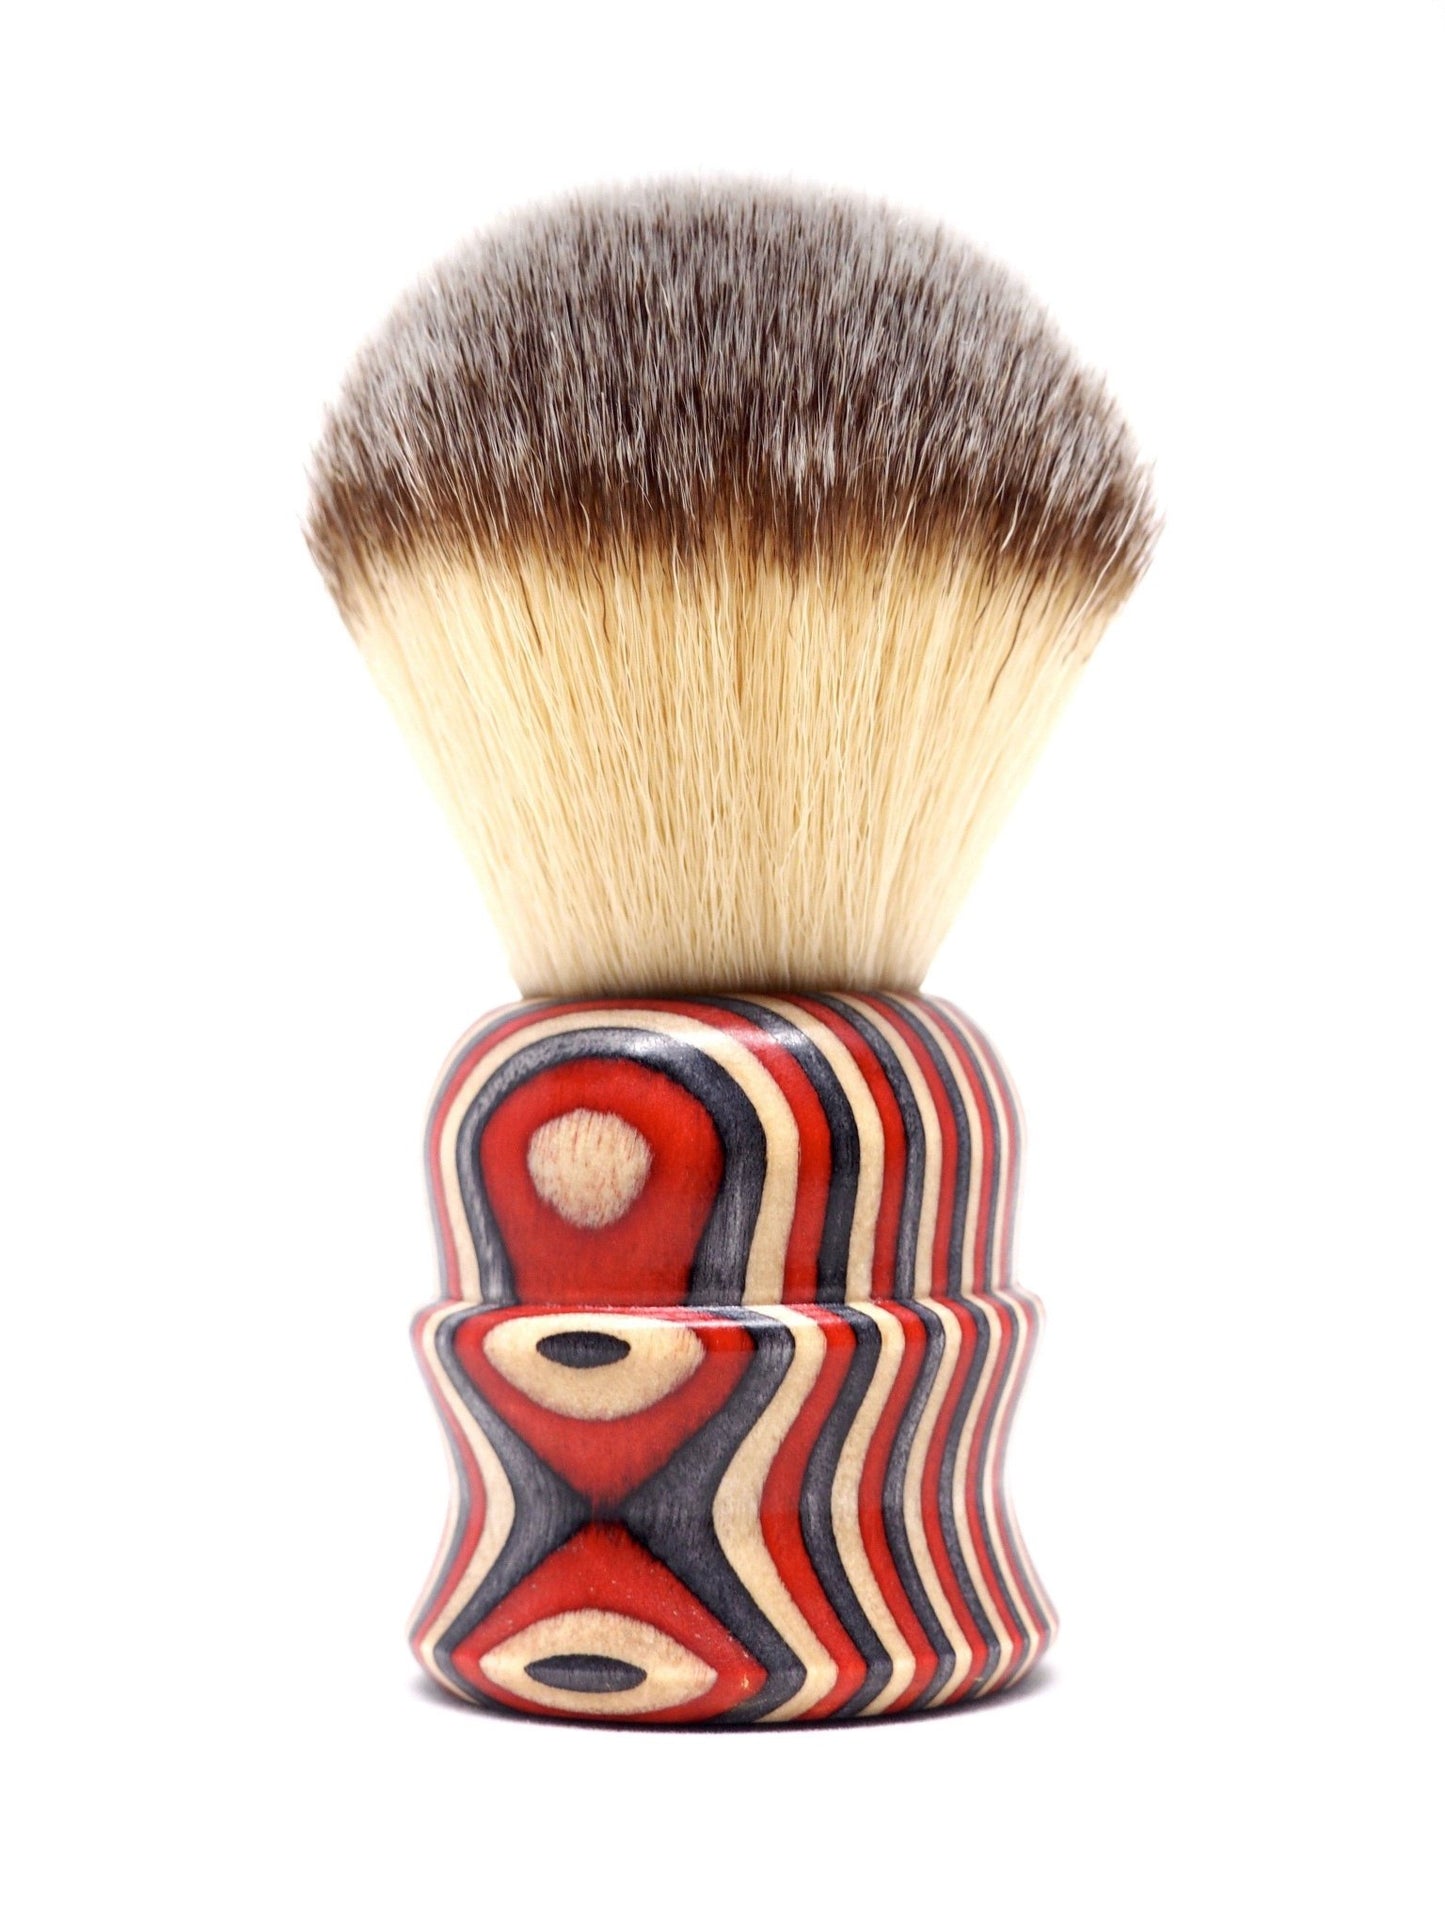 Load image into Gallery viewer, Whaler Shaving Brush 28mm Synthetic Badger Shaving HMS Adventure Galley Color - Black Ship Grooming Co.
